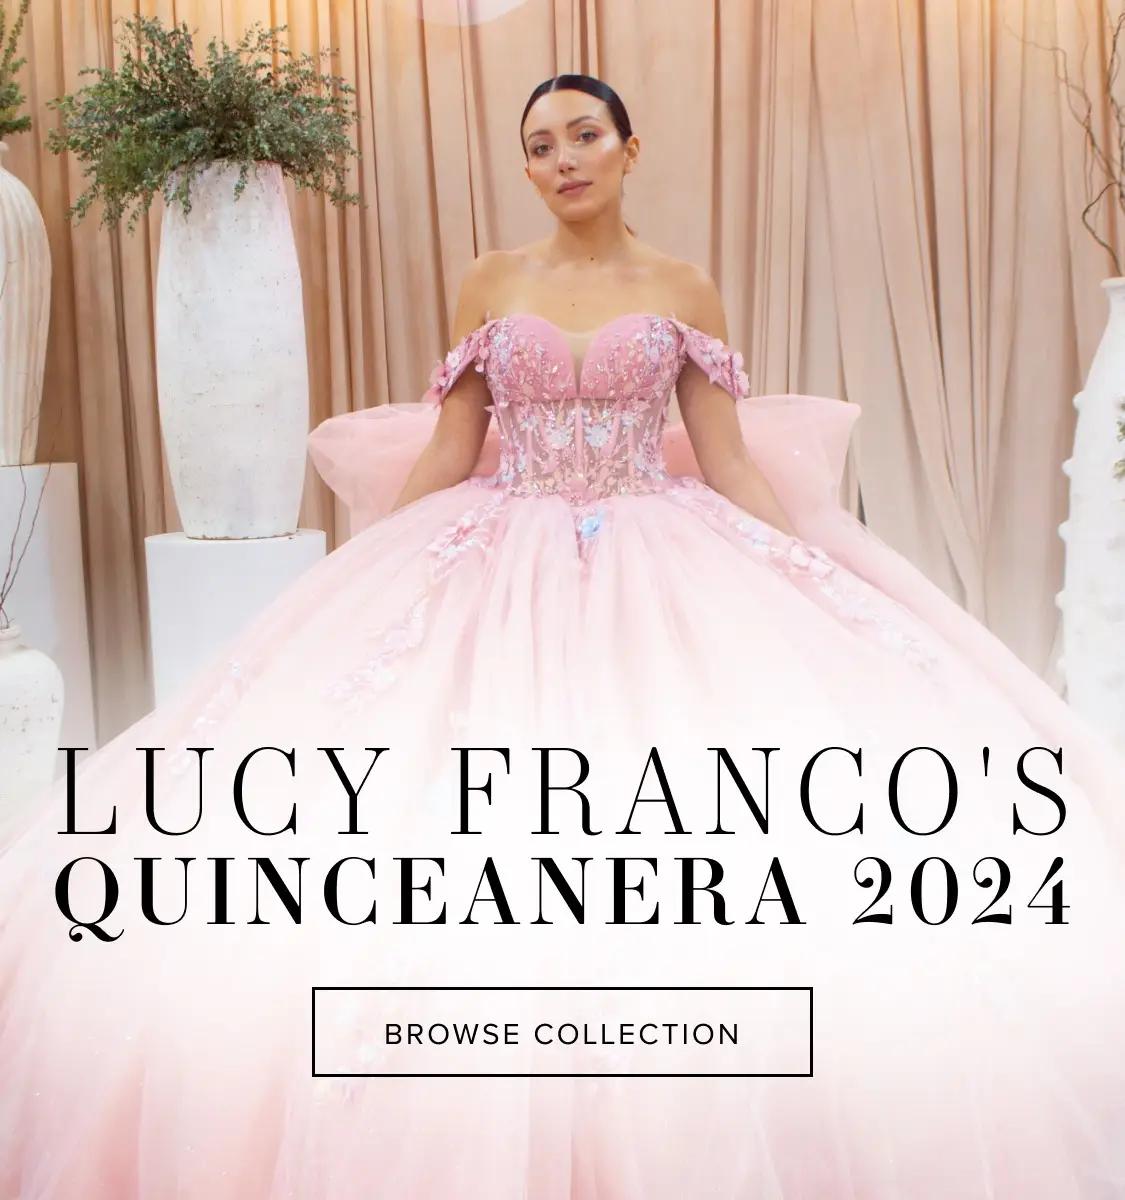 Lucy Franco Quinceanera 2024 banner mobile